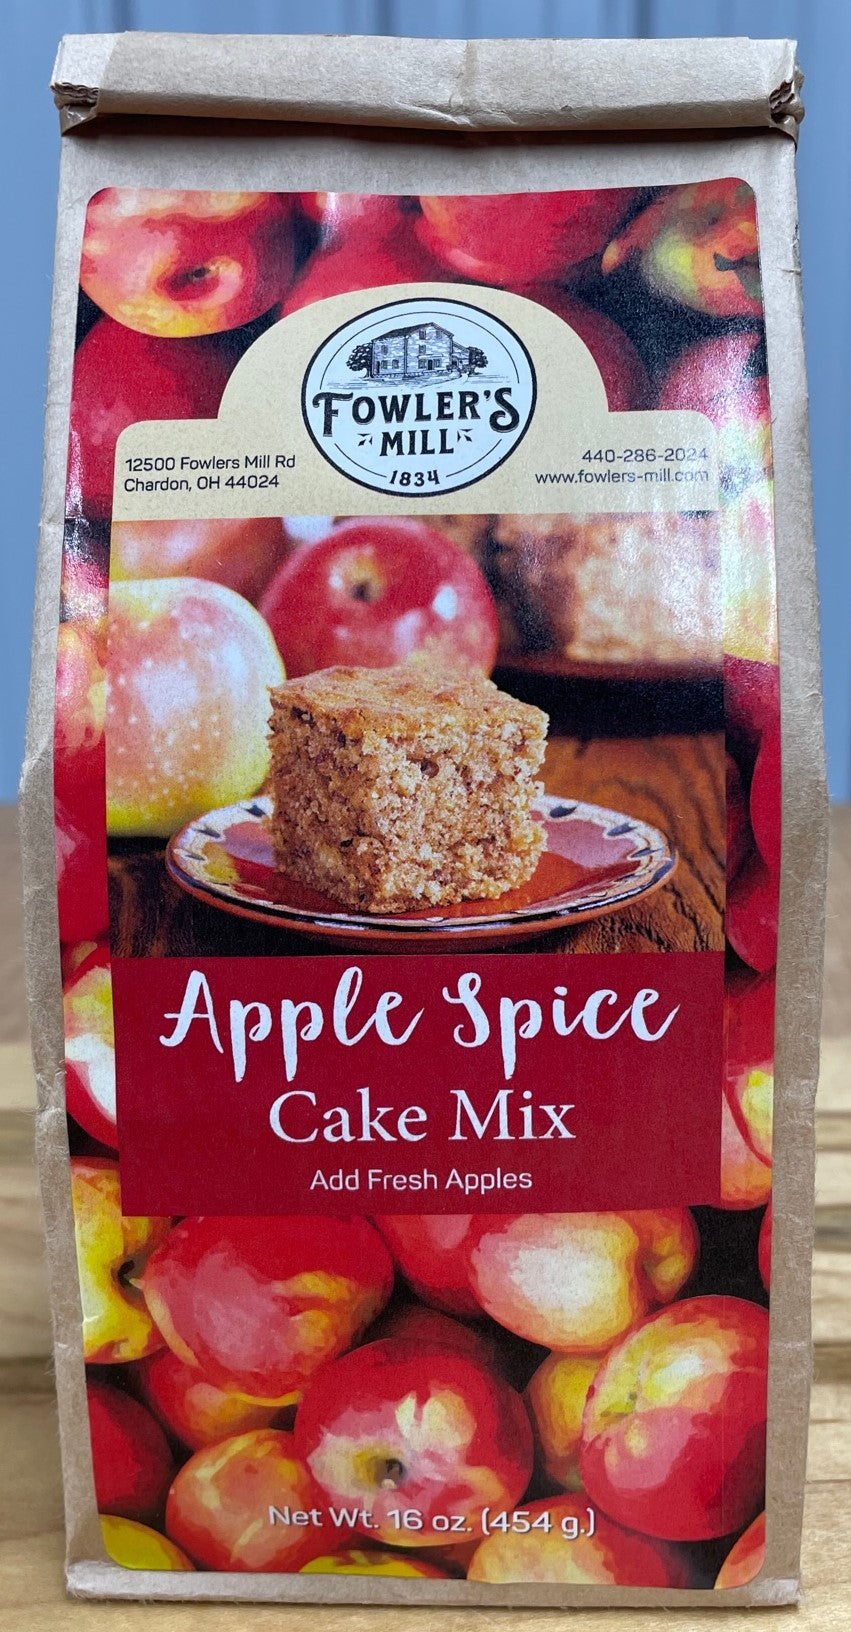 Fowler's Mill Apple Spice Cake Mix